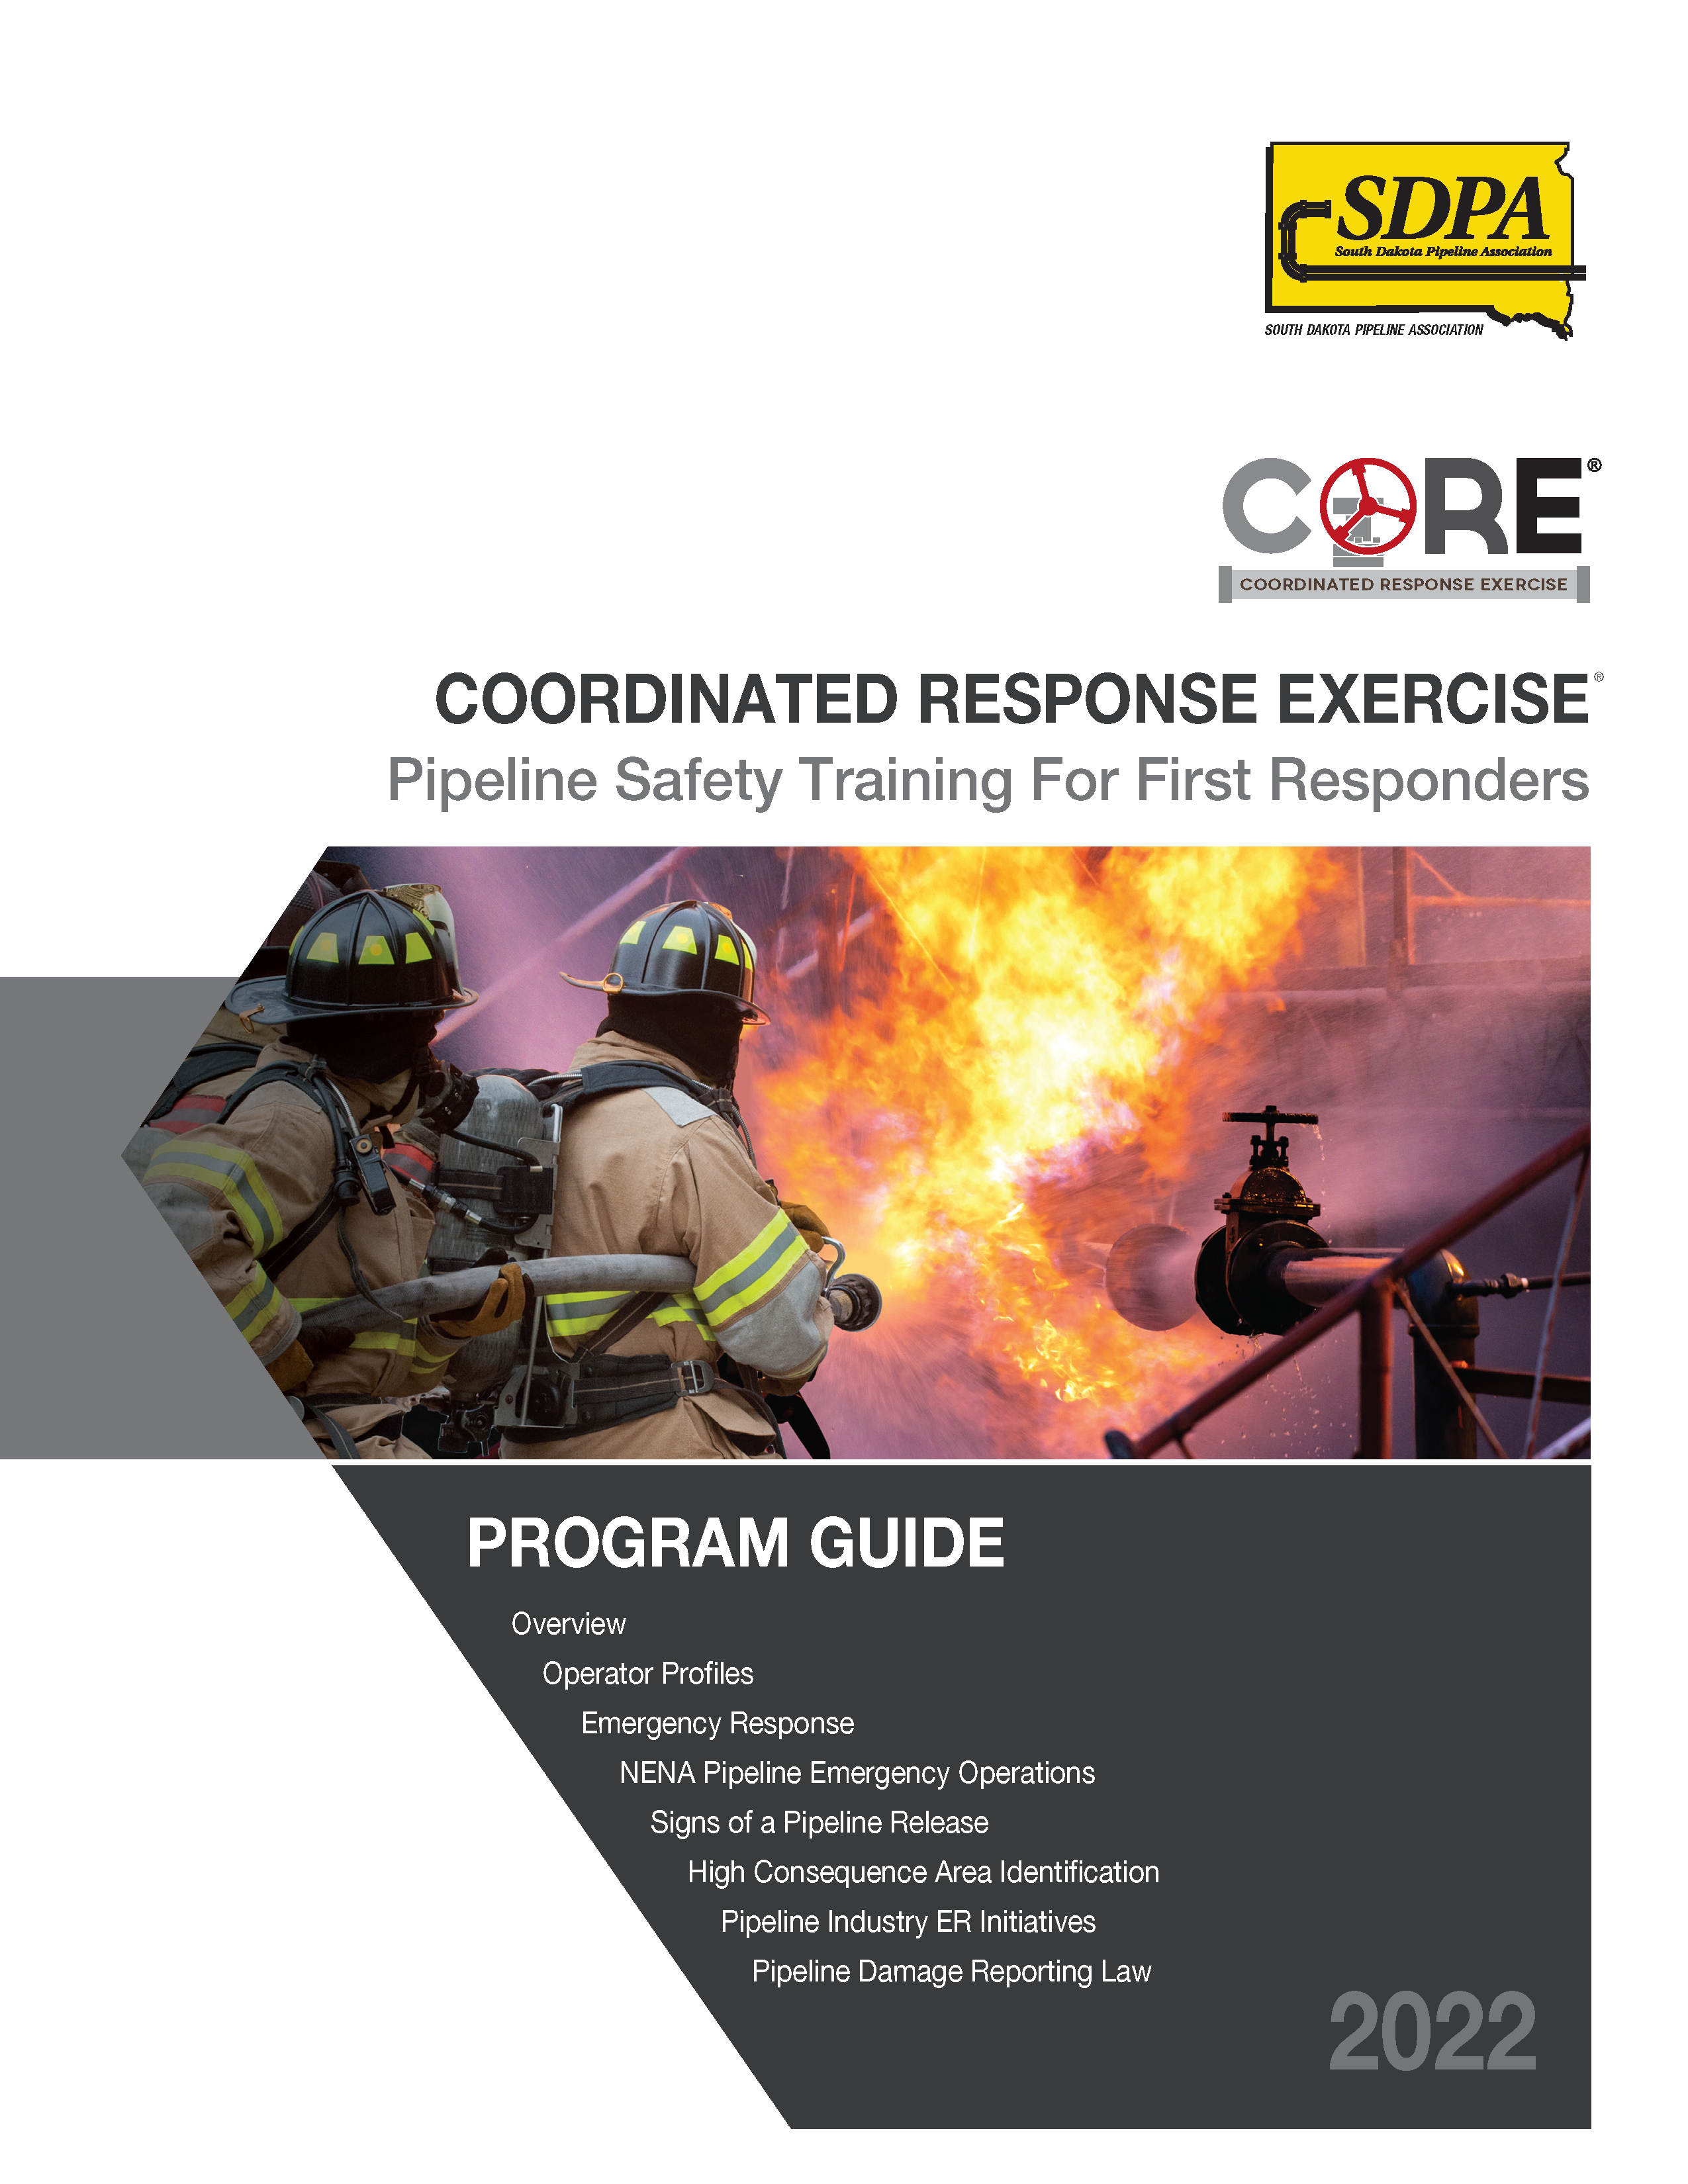 Download the 2022 SDPA Emergency Response Training Materials